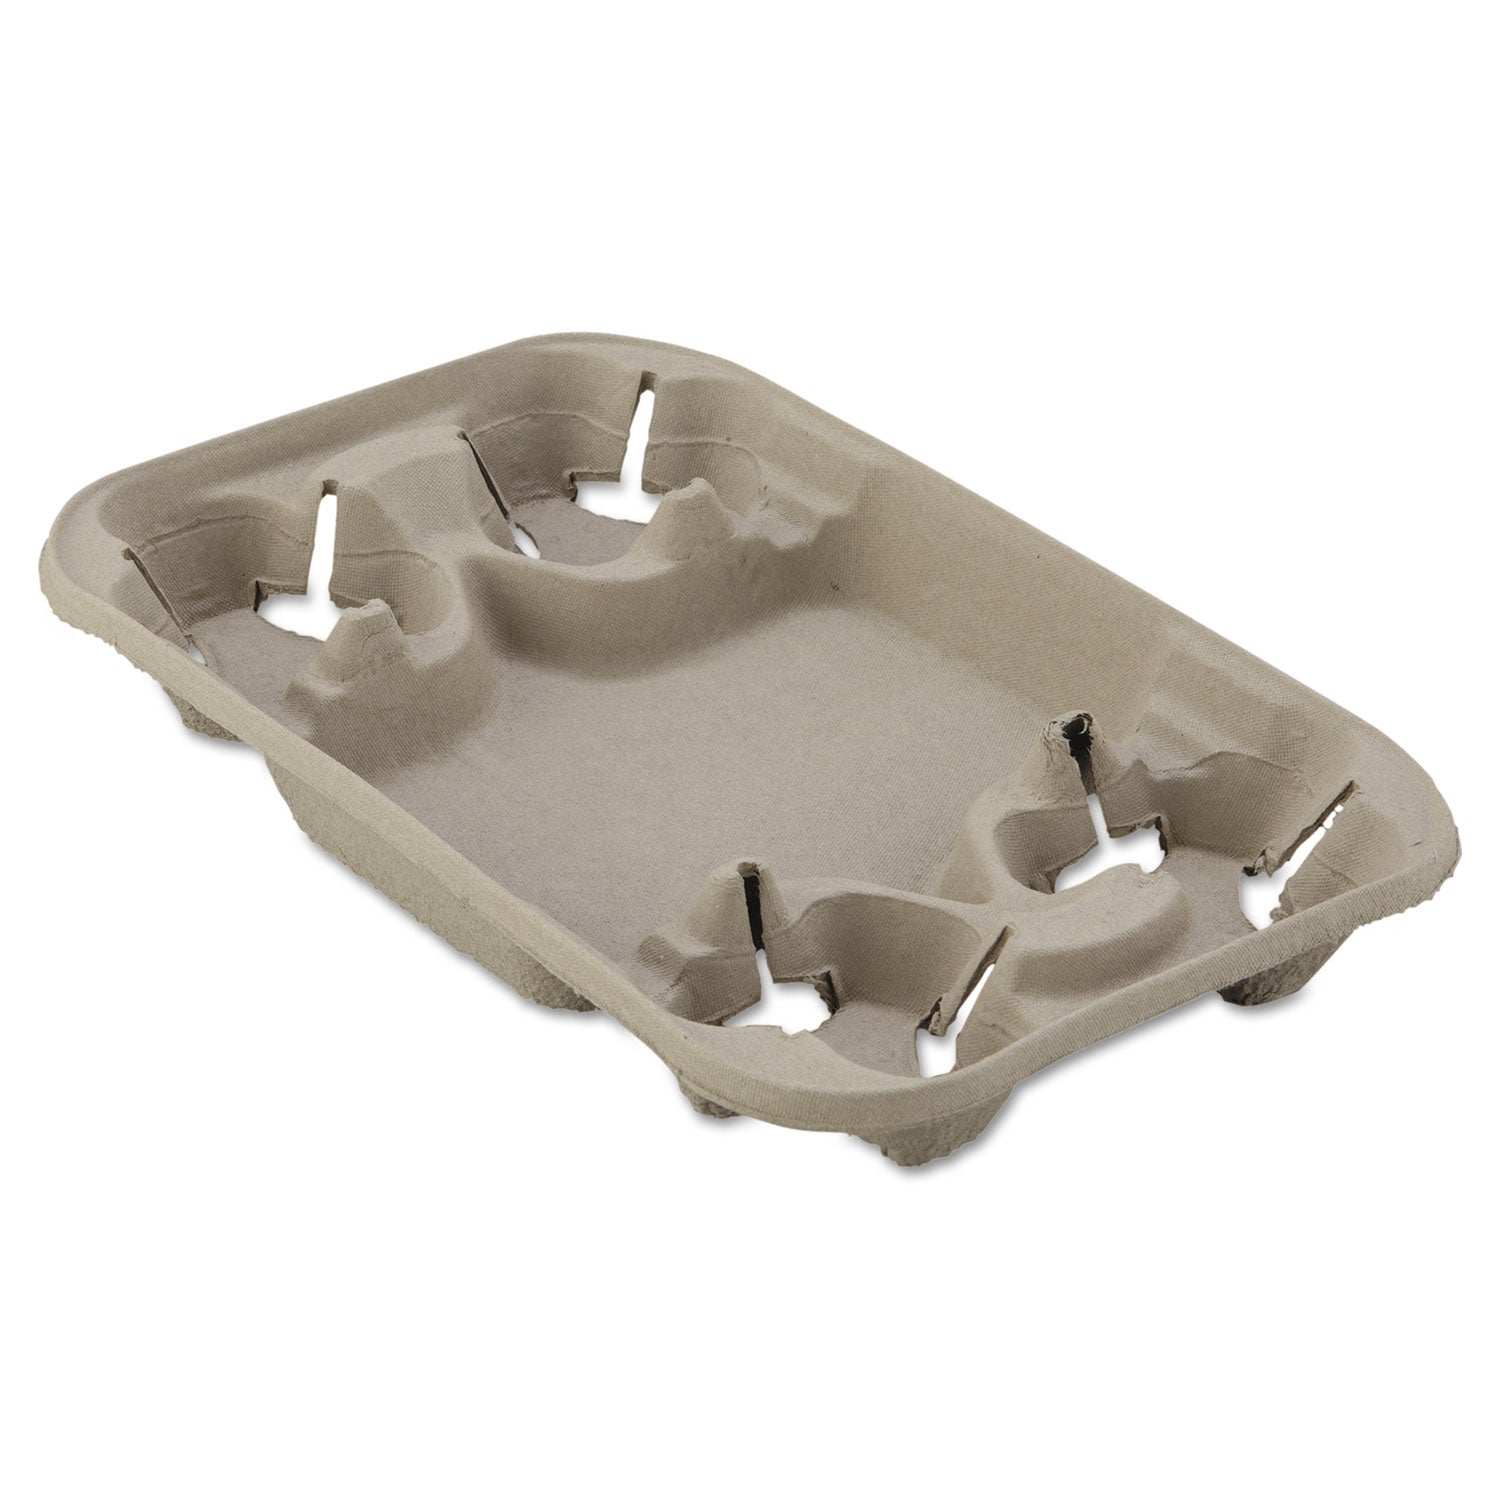 strongholder-molded-fiber-cup-food-tray-8-oz-to-22-oz-four-cups-beige-250-carton_huh20969ct - 1